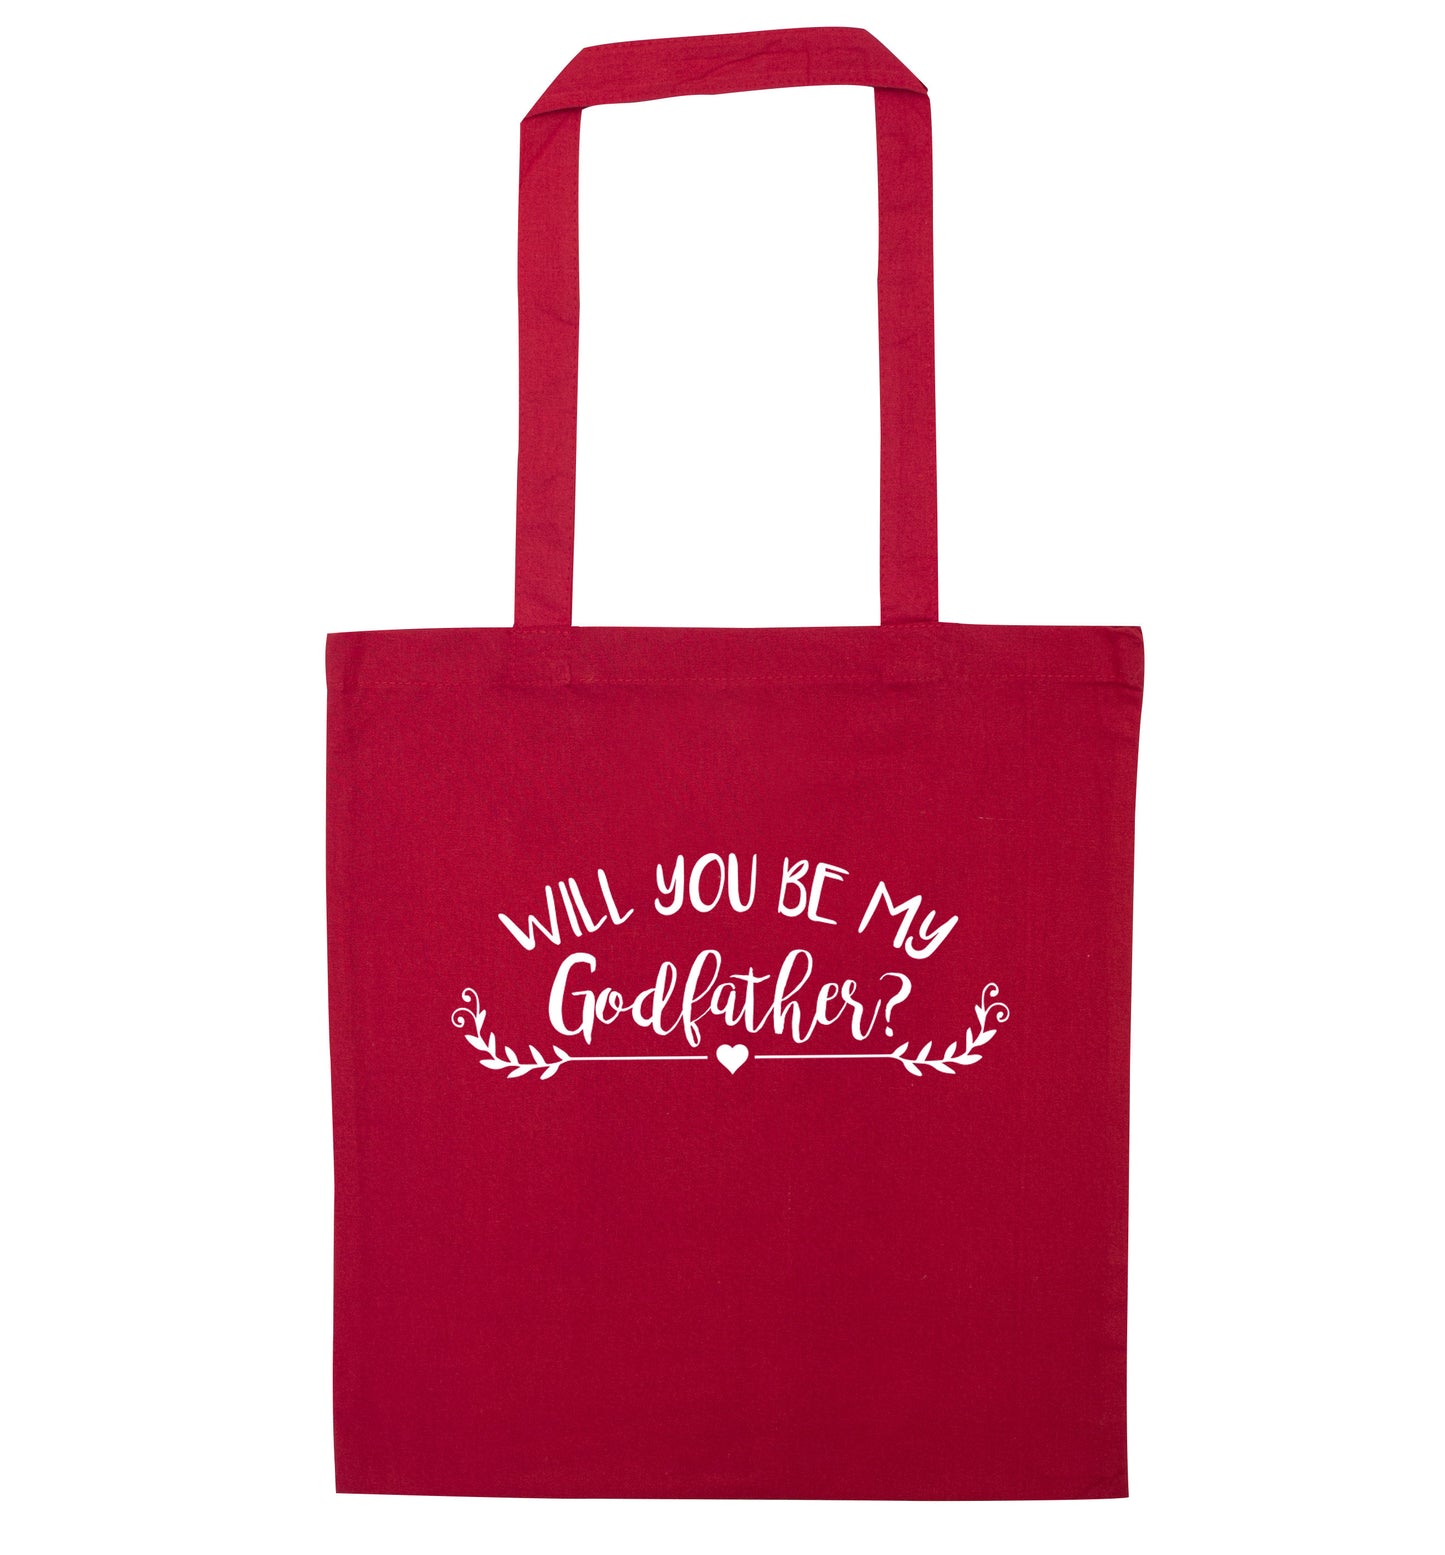 Will you be my godfather? red tote bag